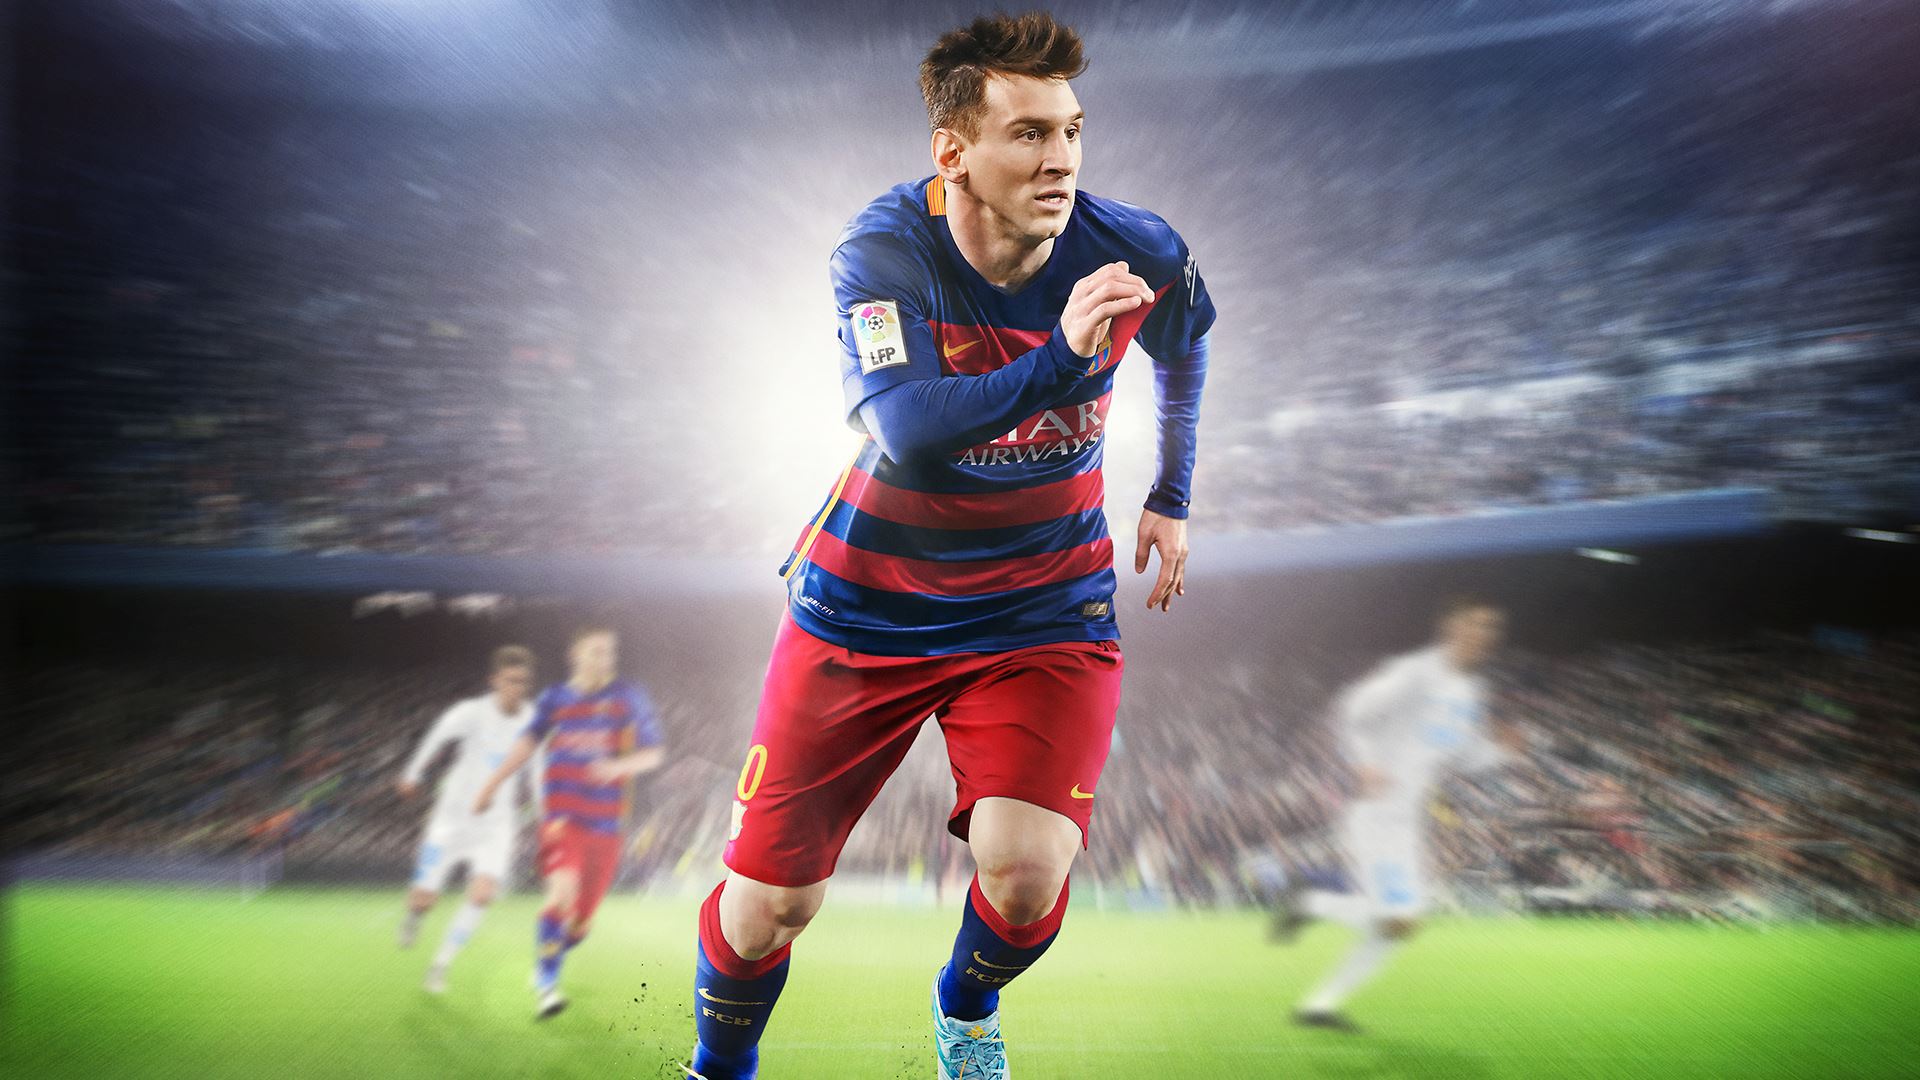 FIFA 16 HD Wallpapers Full HD Pictures 1920x1080